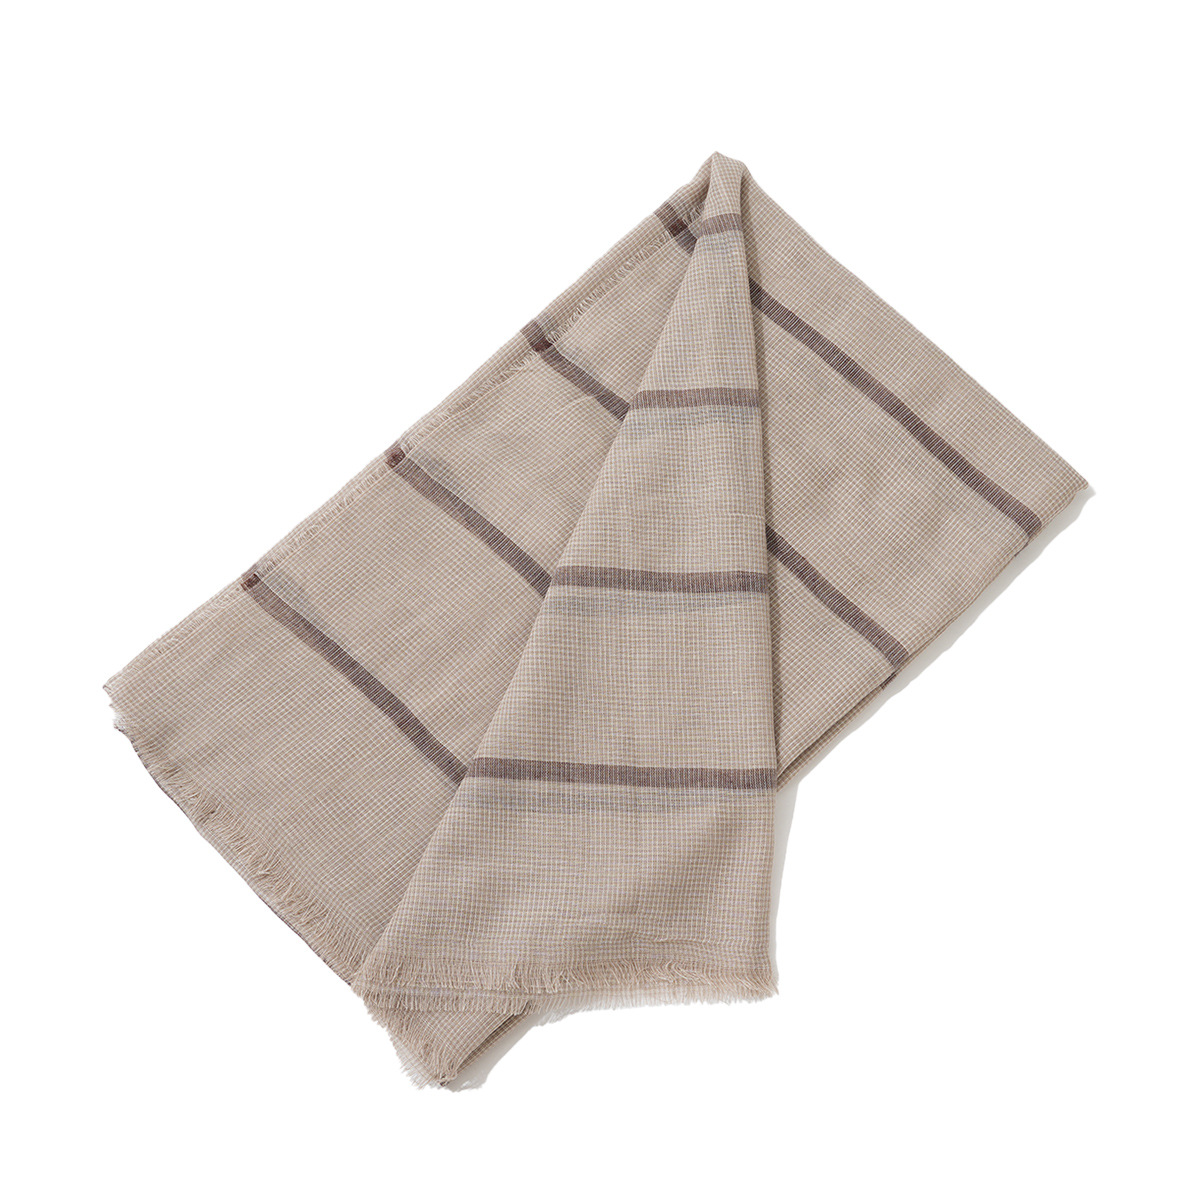 One Piece Dropshipping European and American Spring and Autumn New Casual Striped Cotton and Linen Shawl Classic Solid Color Short Beard Popular Outer Scarf